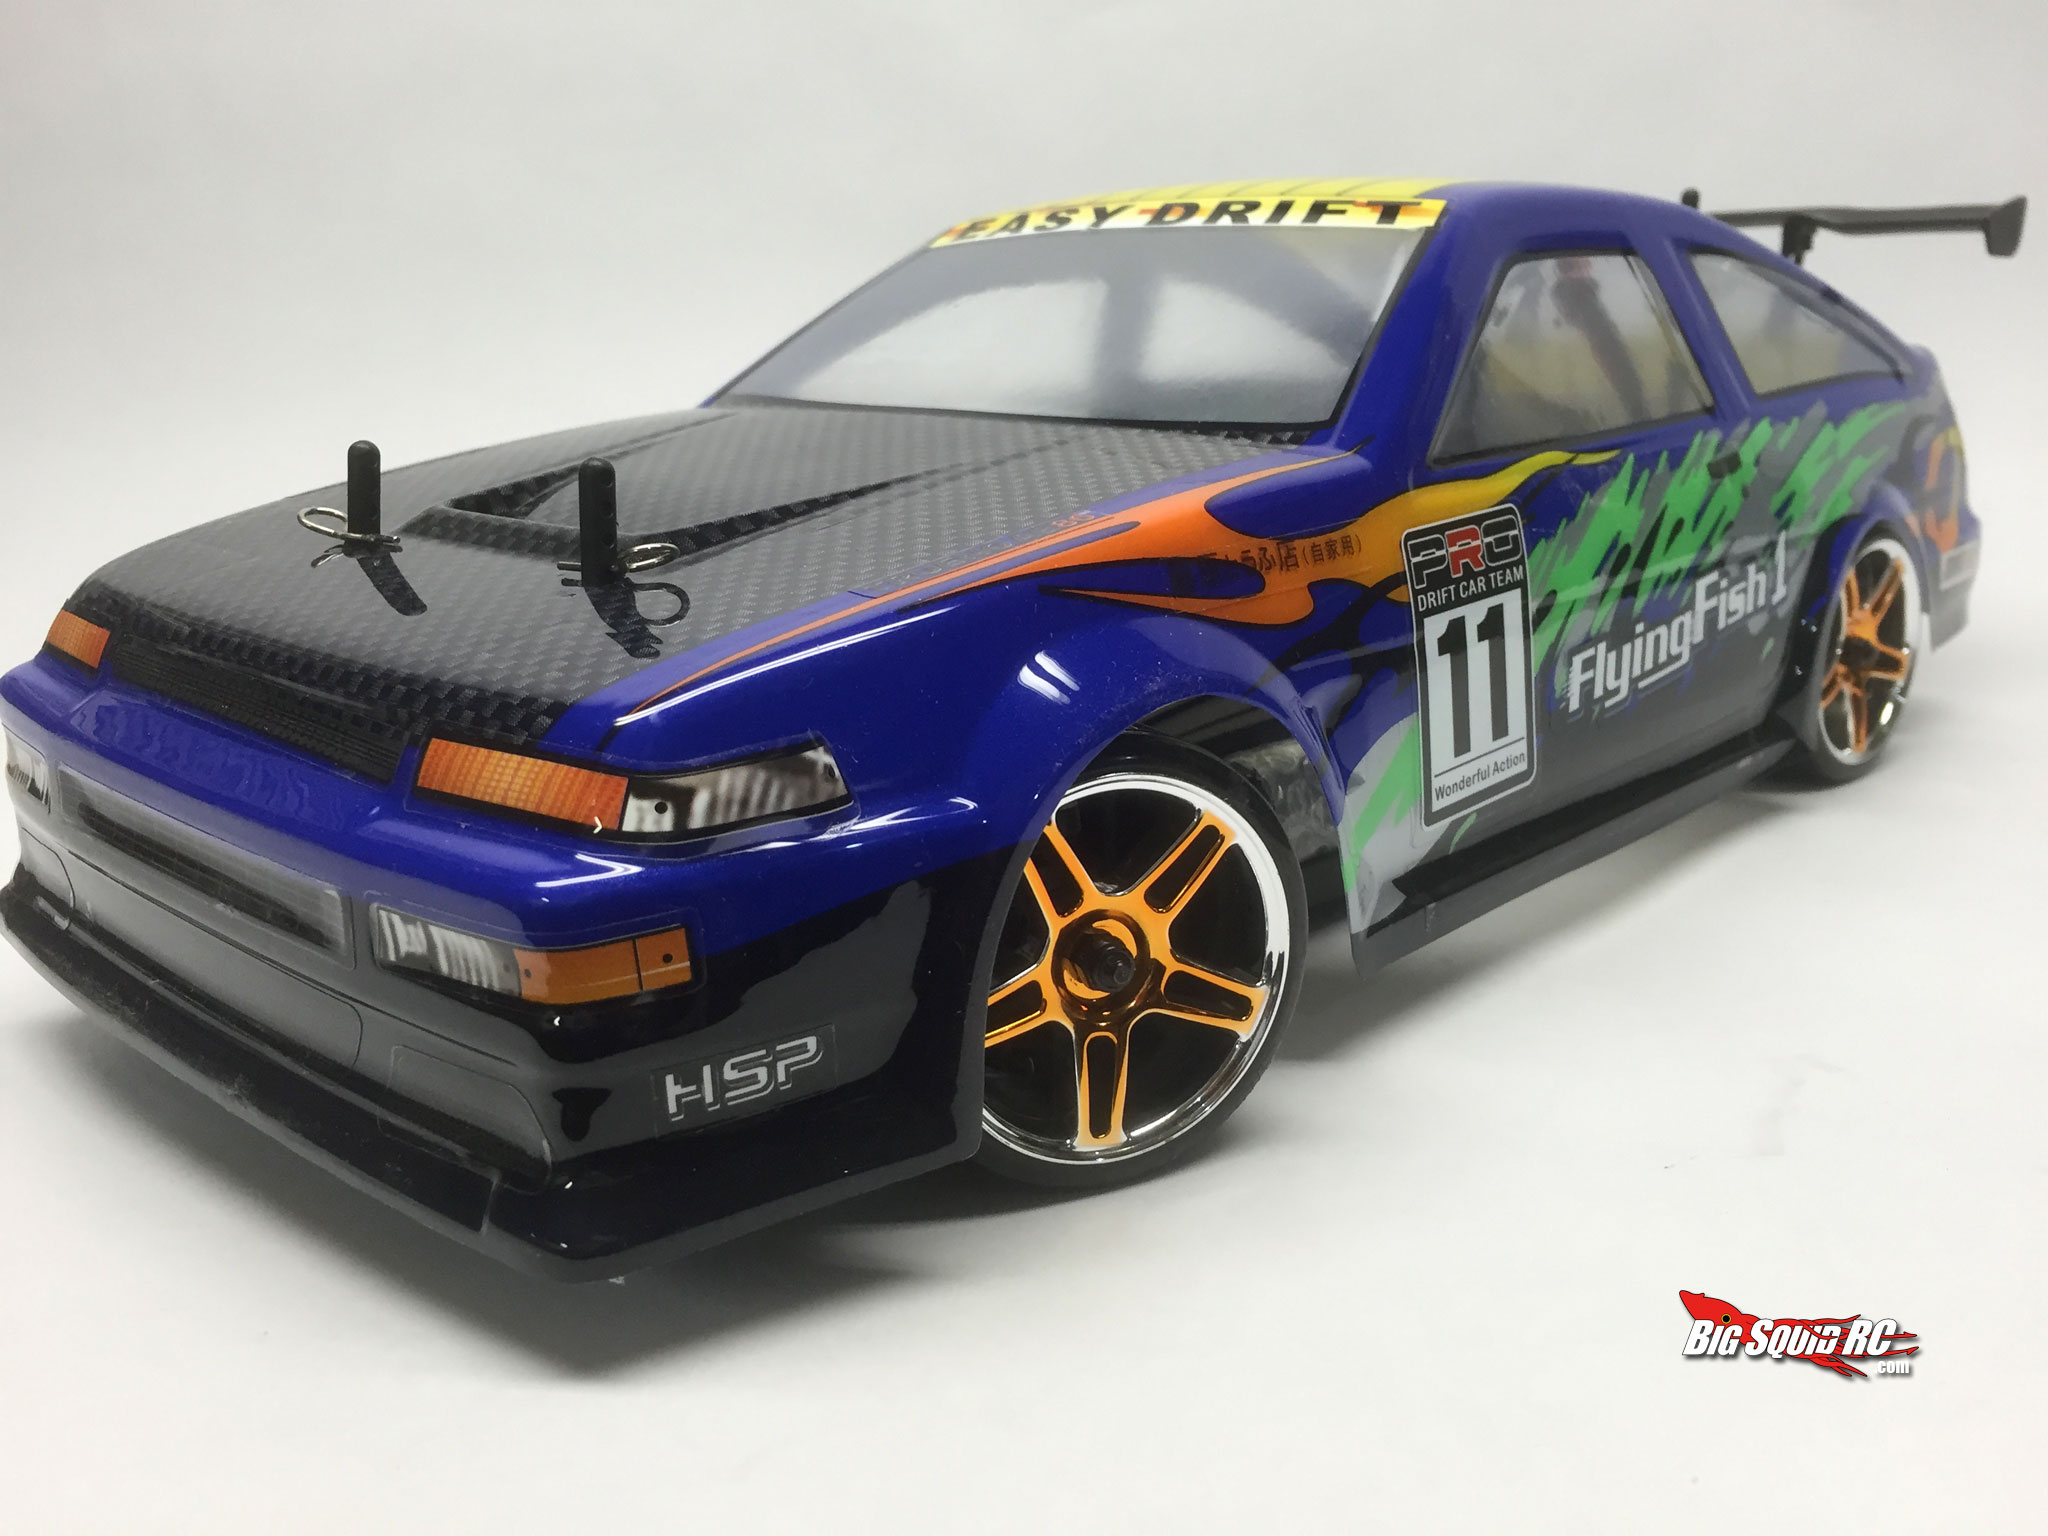 HSP Flying Fish RTR Drift car review « Big Squid RC – RC Car and Truck  News, Reviews, Videos, and More!